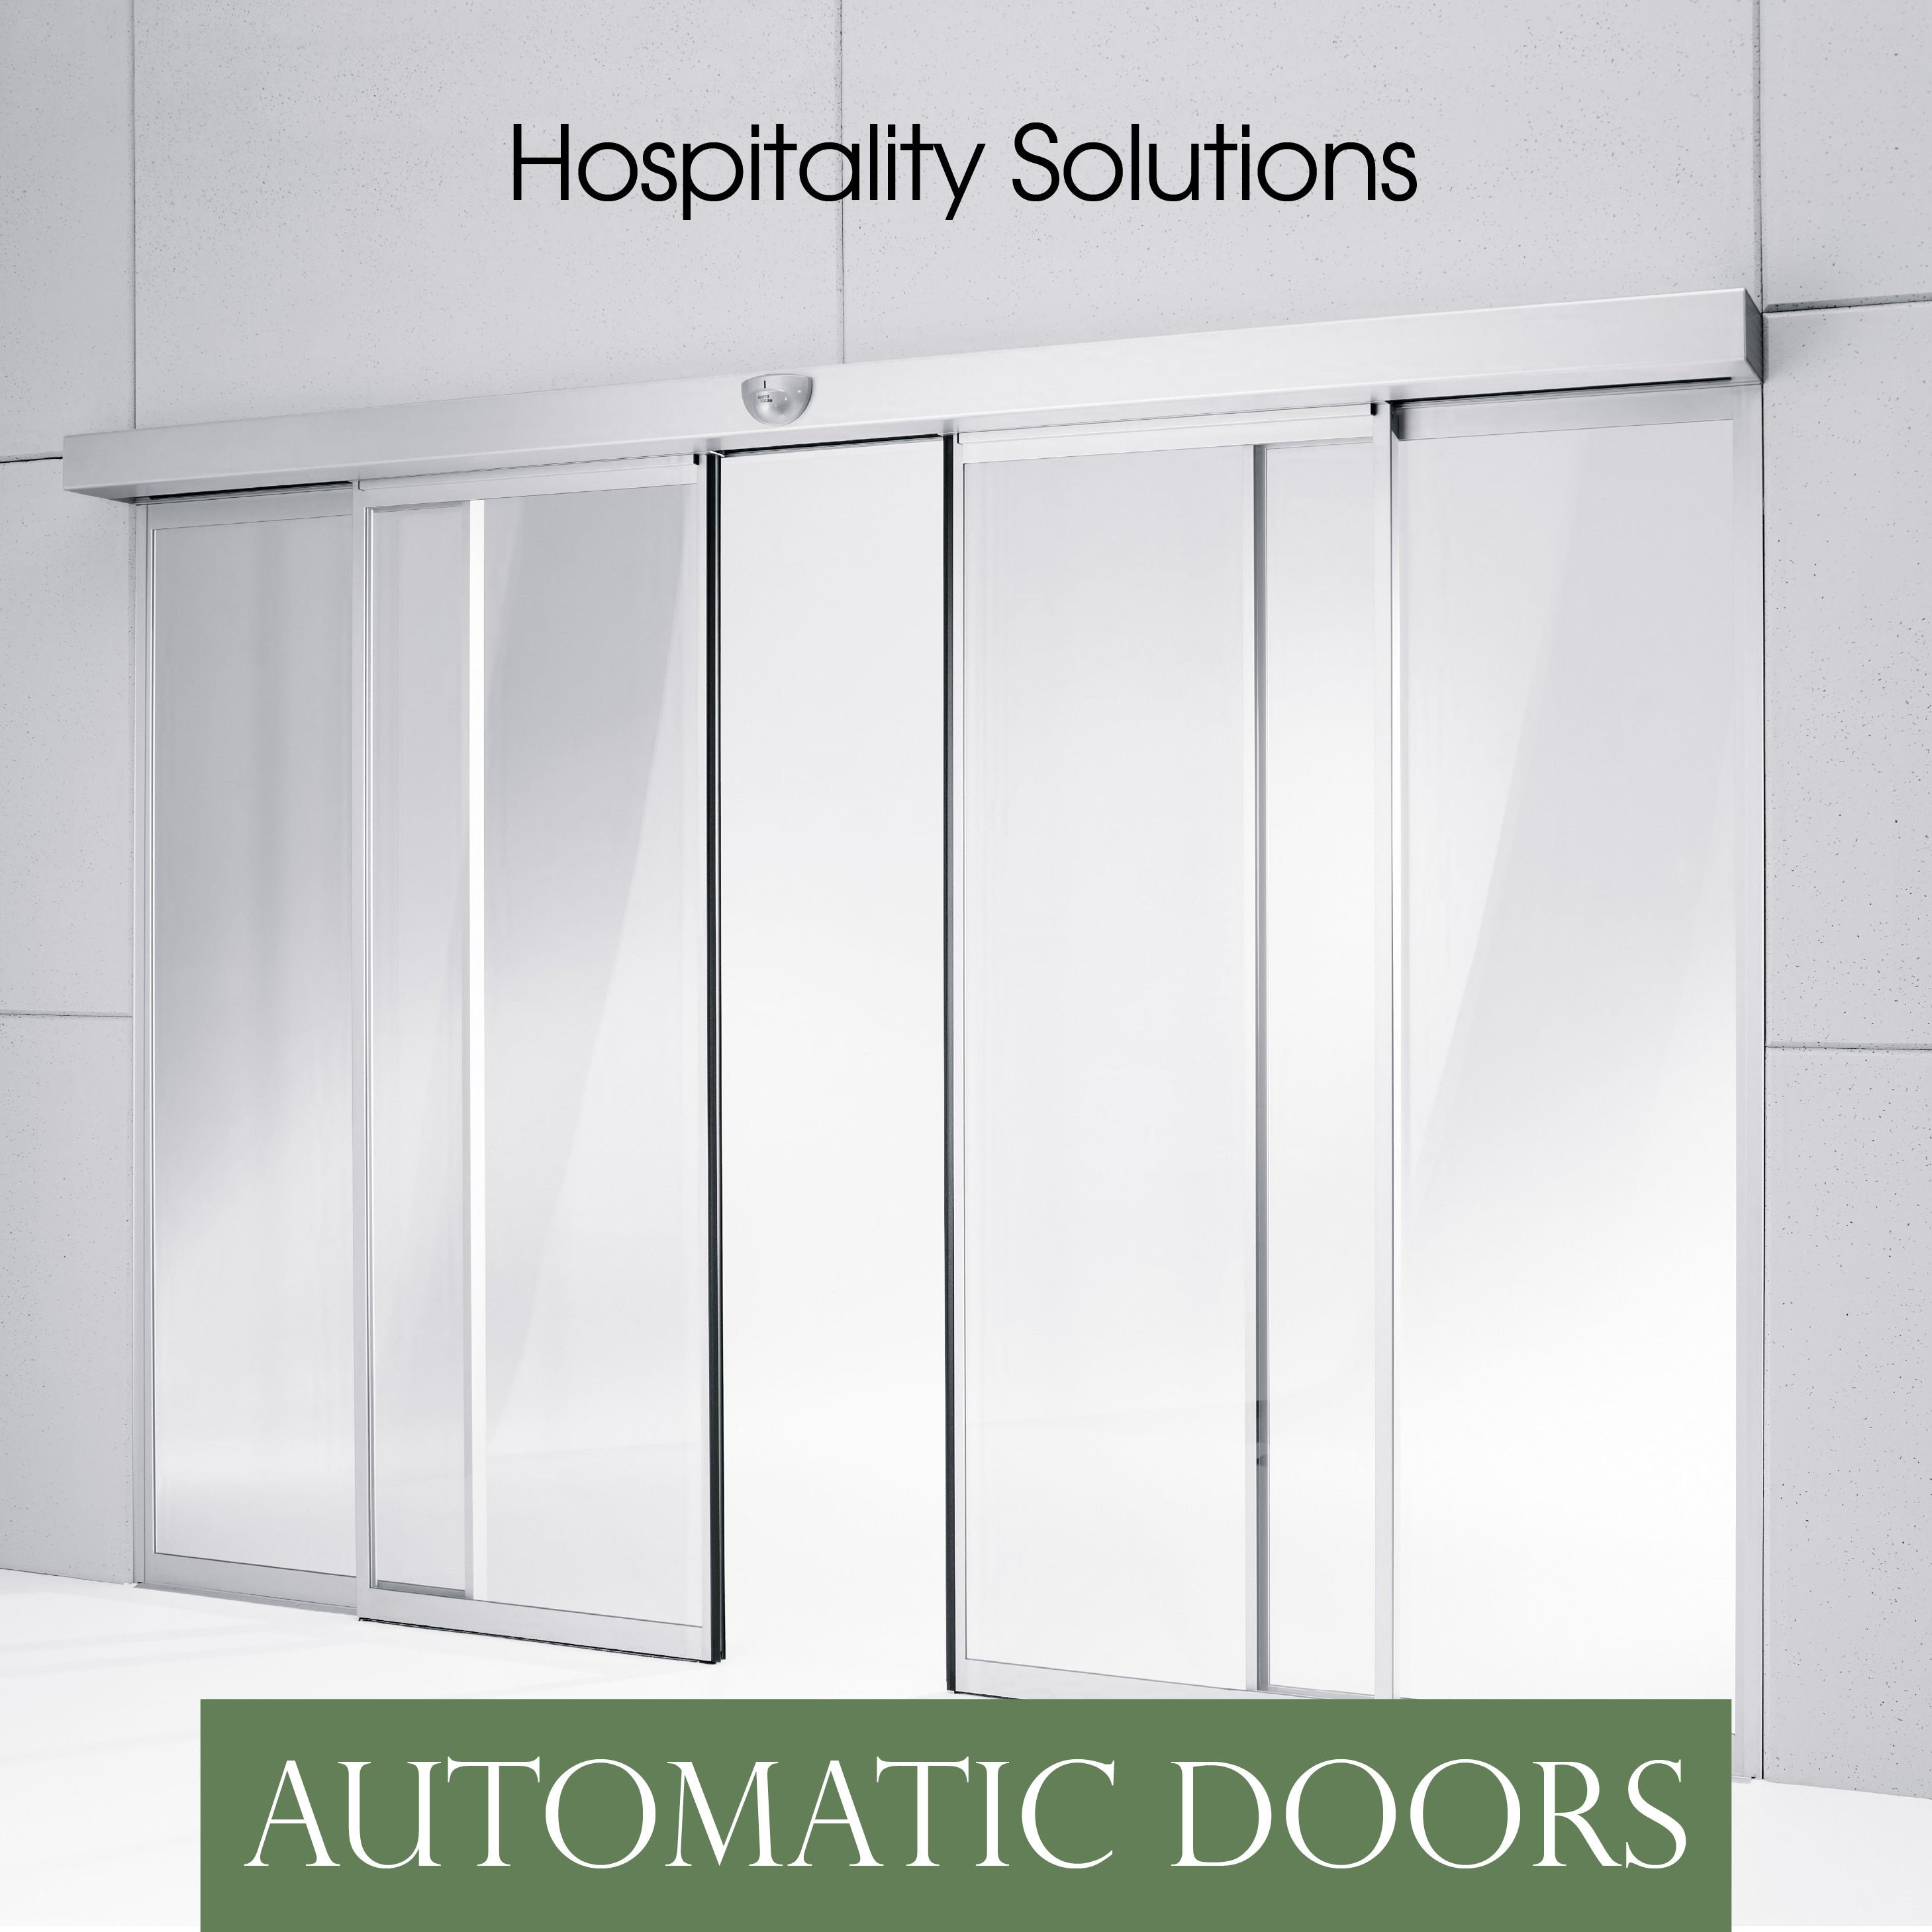 COLOURLIVING | HOSPITALITY SOLUTIONS | AUTOMATIC DOORS